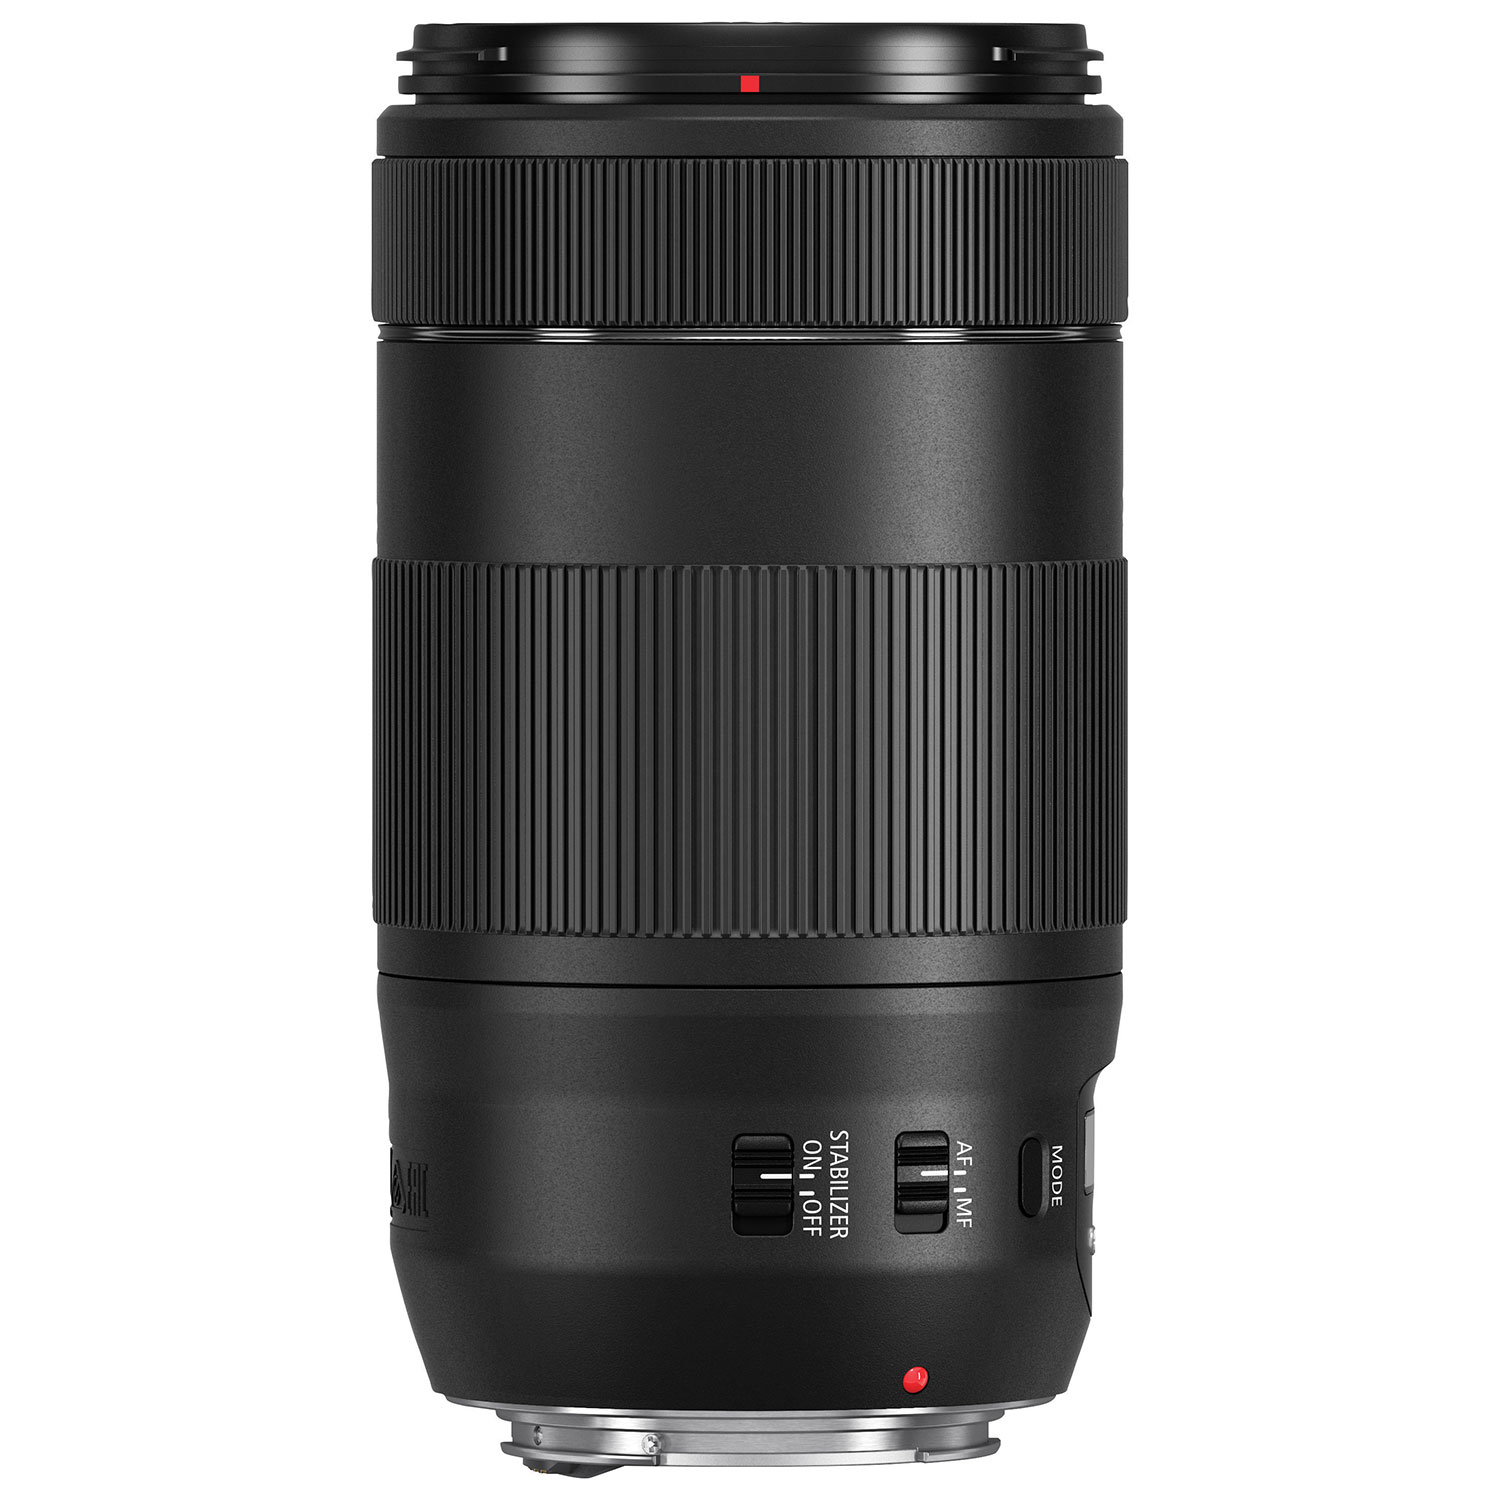 Canon EF 70-300mm f/4-5.6 IS II USM Lens | Best Buy Canada